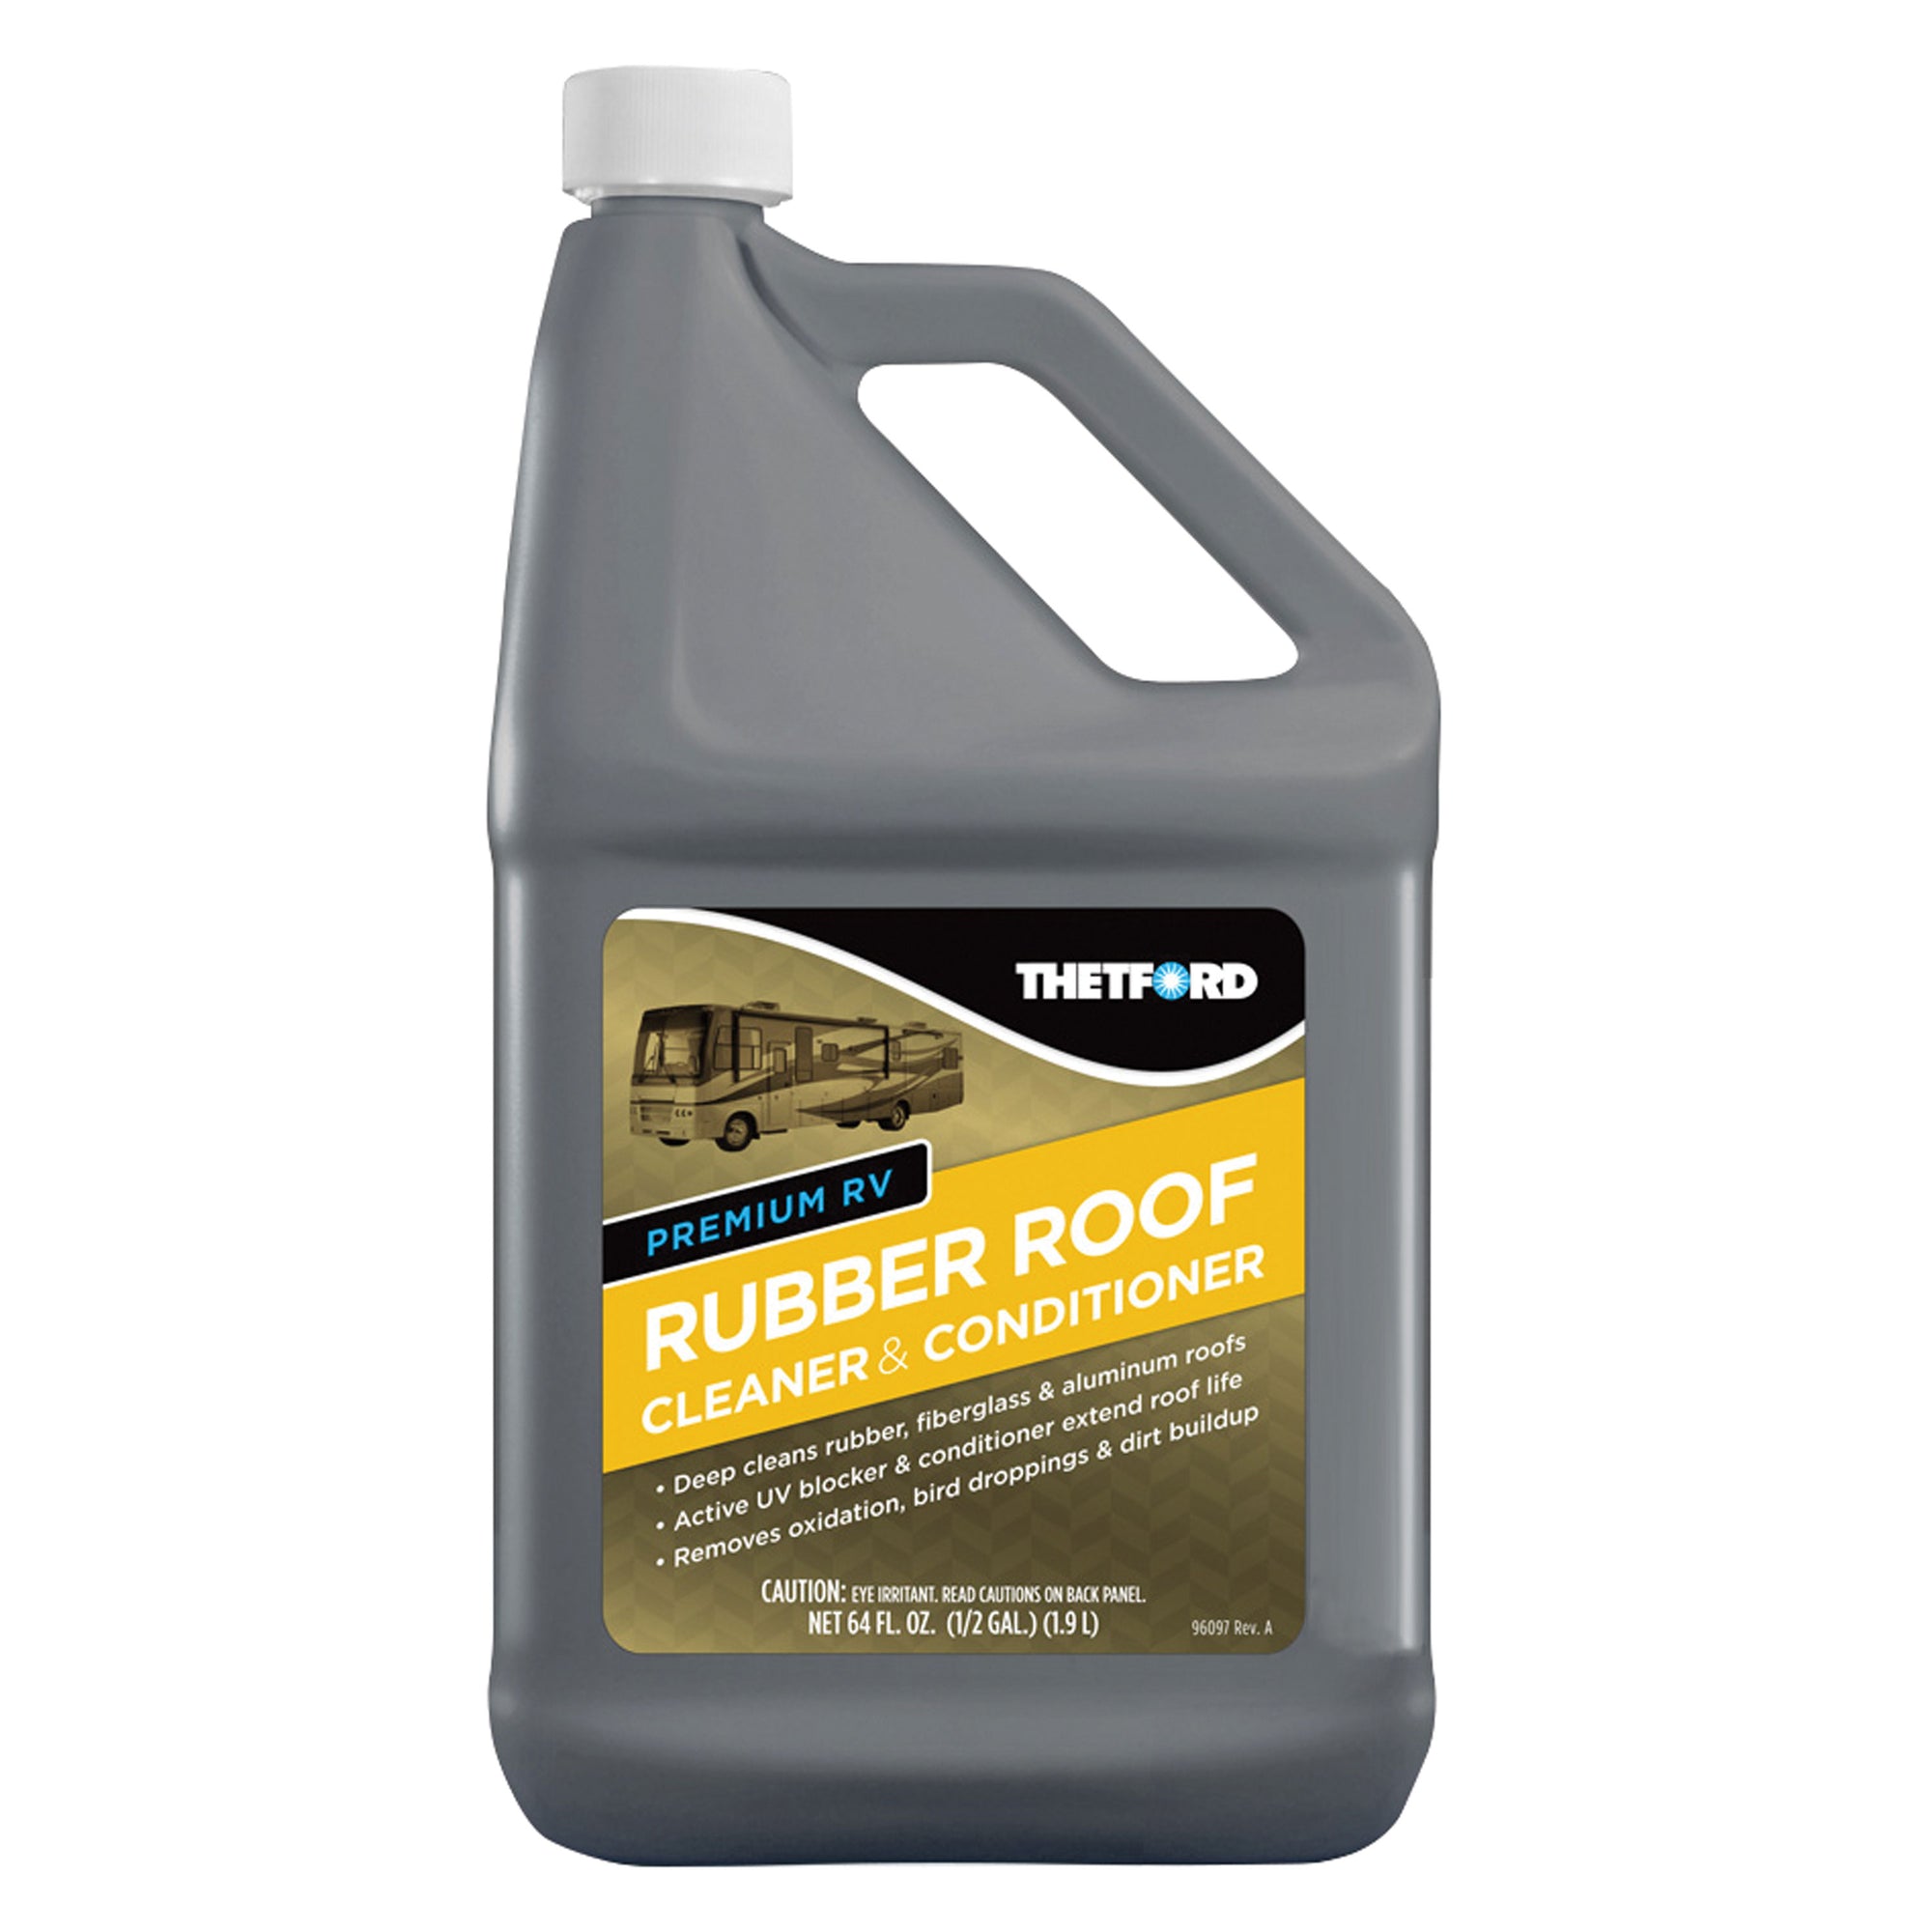 Thetford 96016 Premium RV Rubber Roof Cleaner and Conditioner - 64 oz.